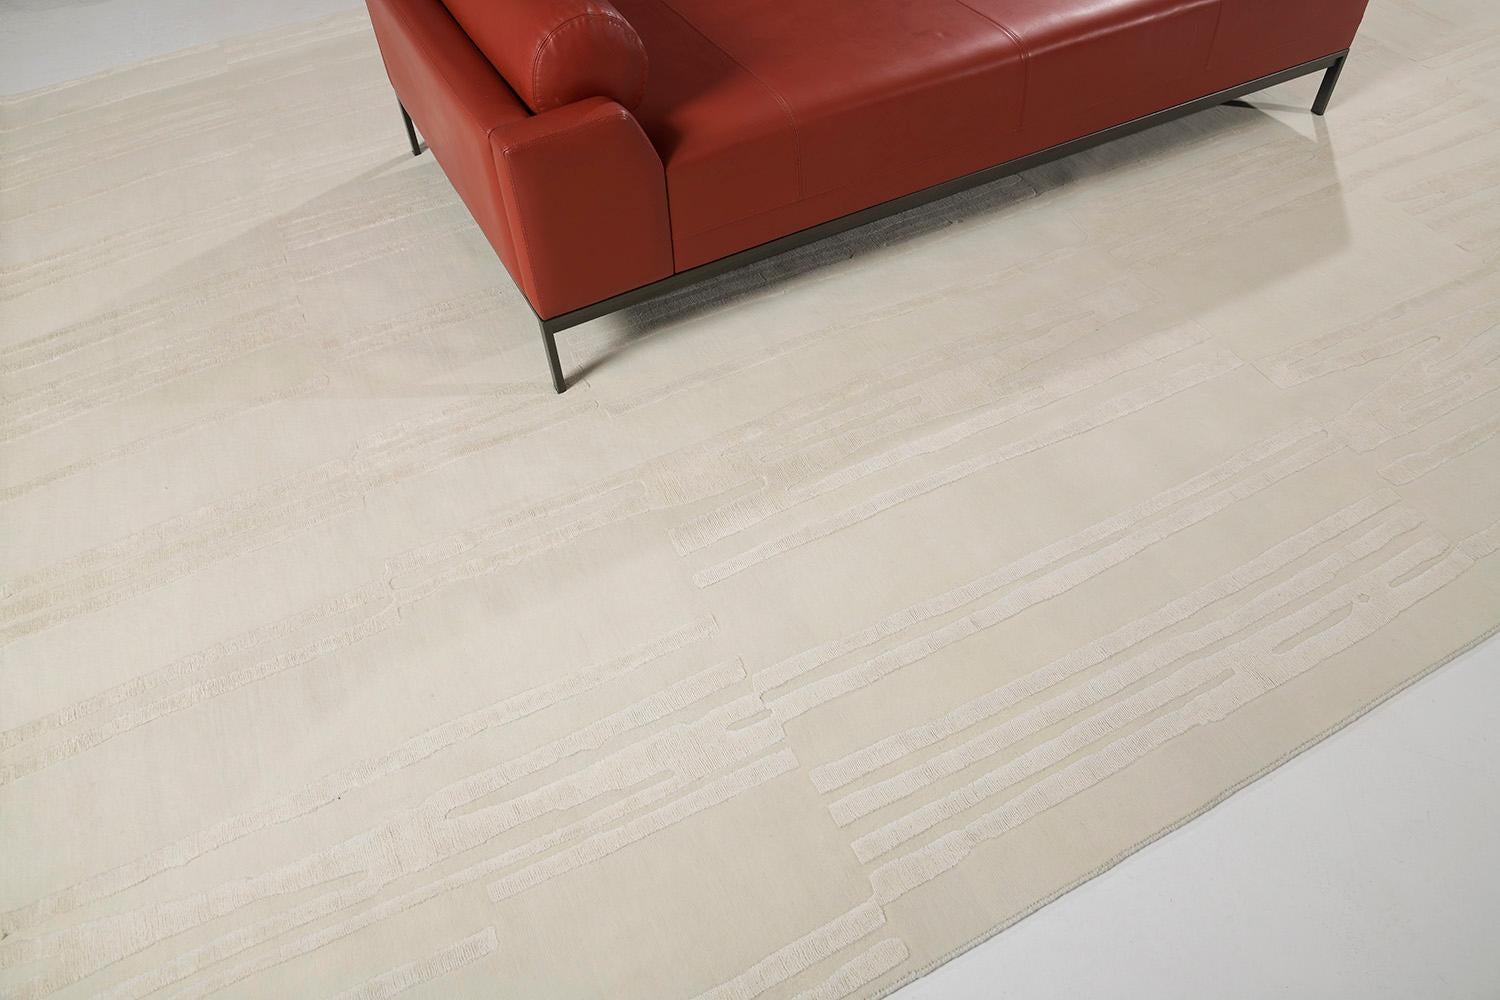 Notes is an elegant wool embossed shag rug. It is a part of the Design Rhymes Collection which pulls inspiration from different aspects of architecture. Don't let this ivory rug fool you with simplicity, it has personality and creates movement and